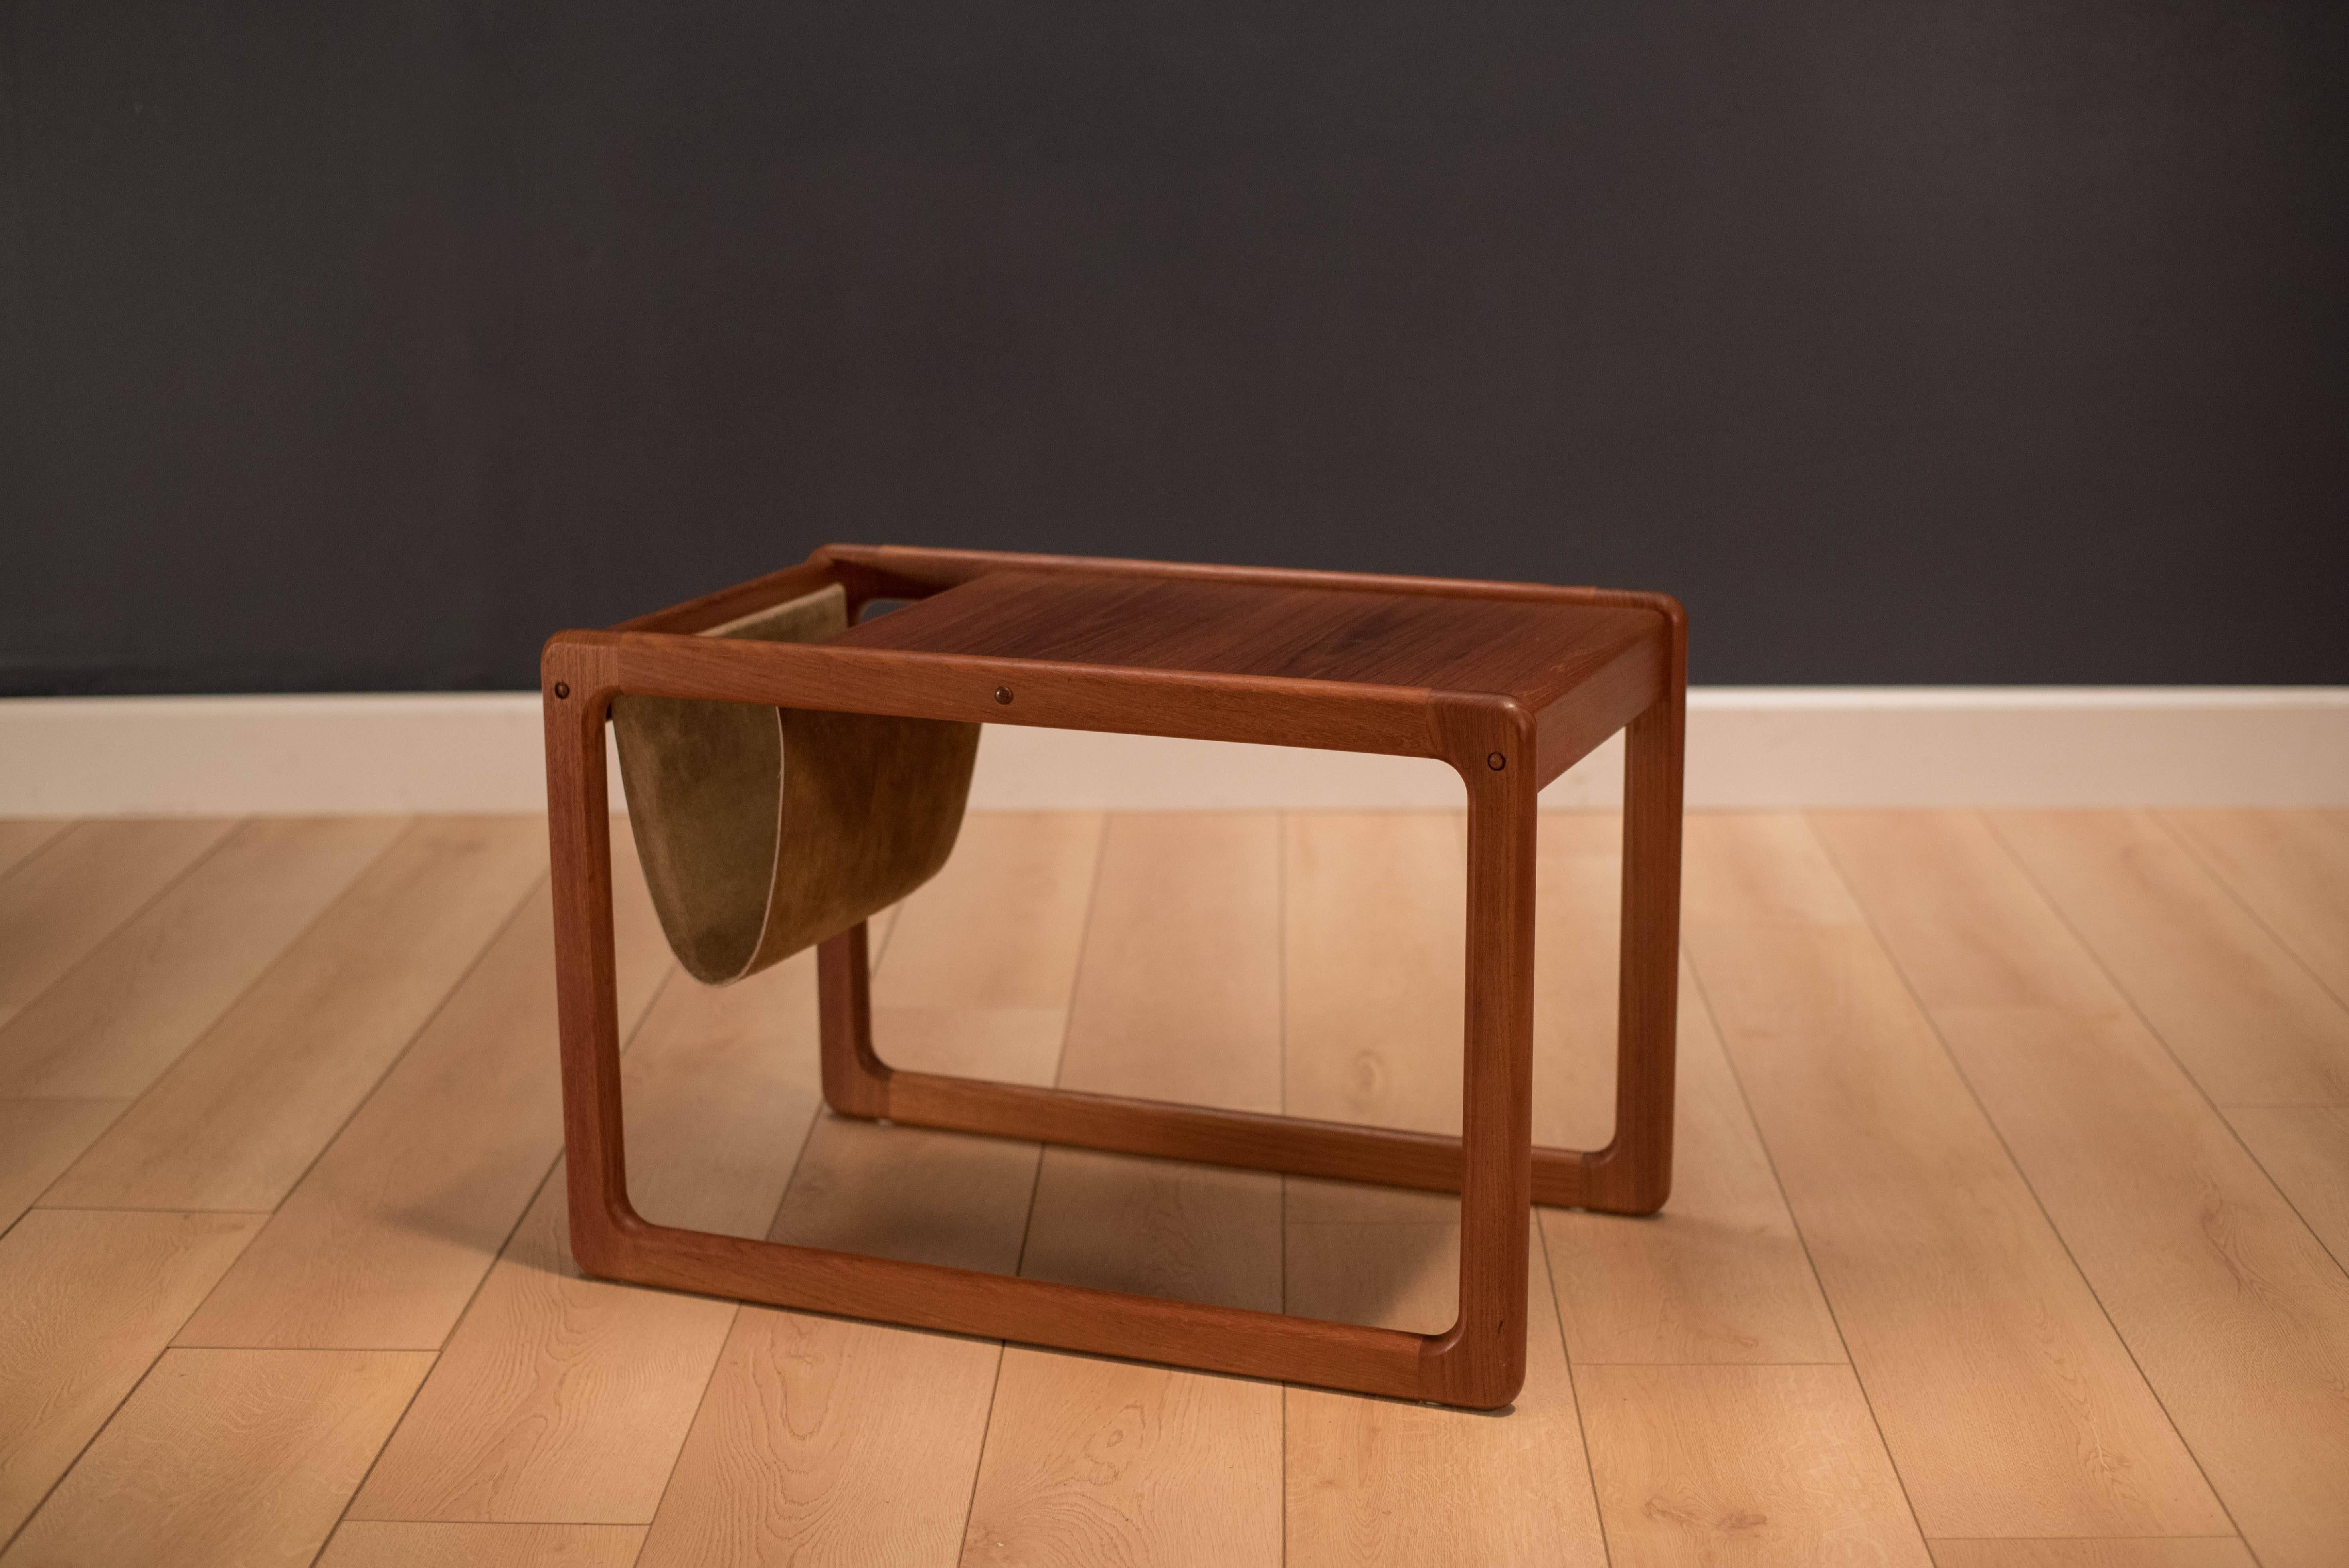 Danish leather magazine rack with attached end table. This unique piece is made of teak with a sculpted leg base. 

